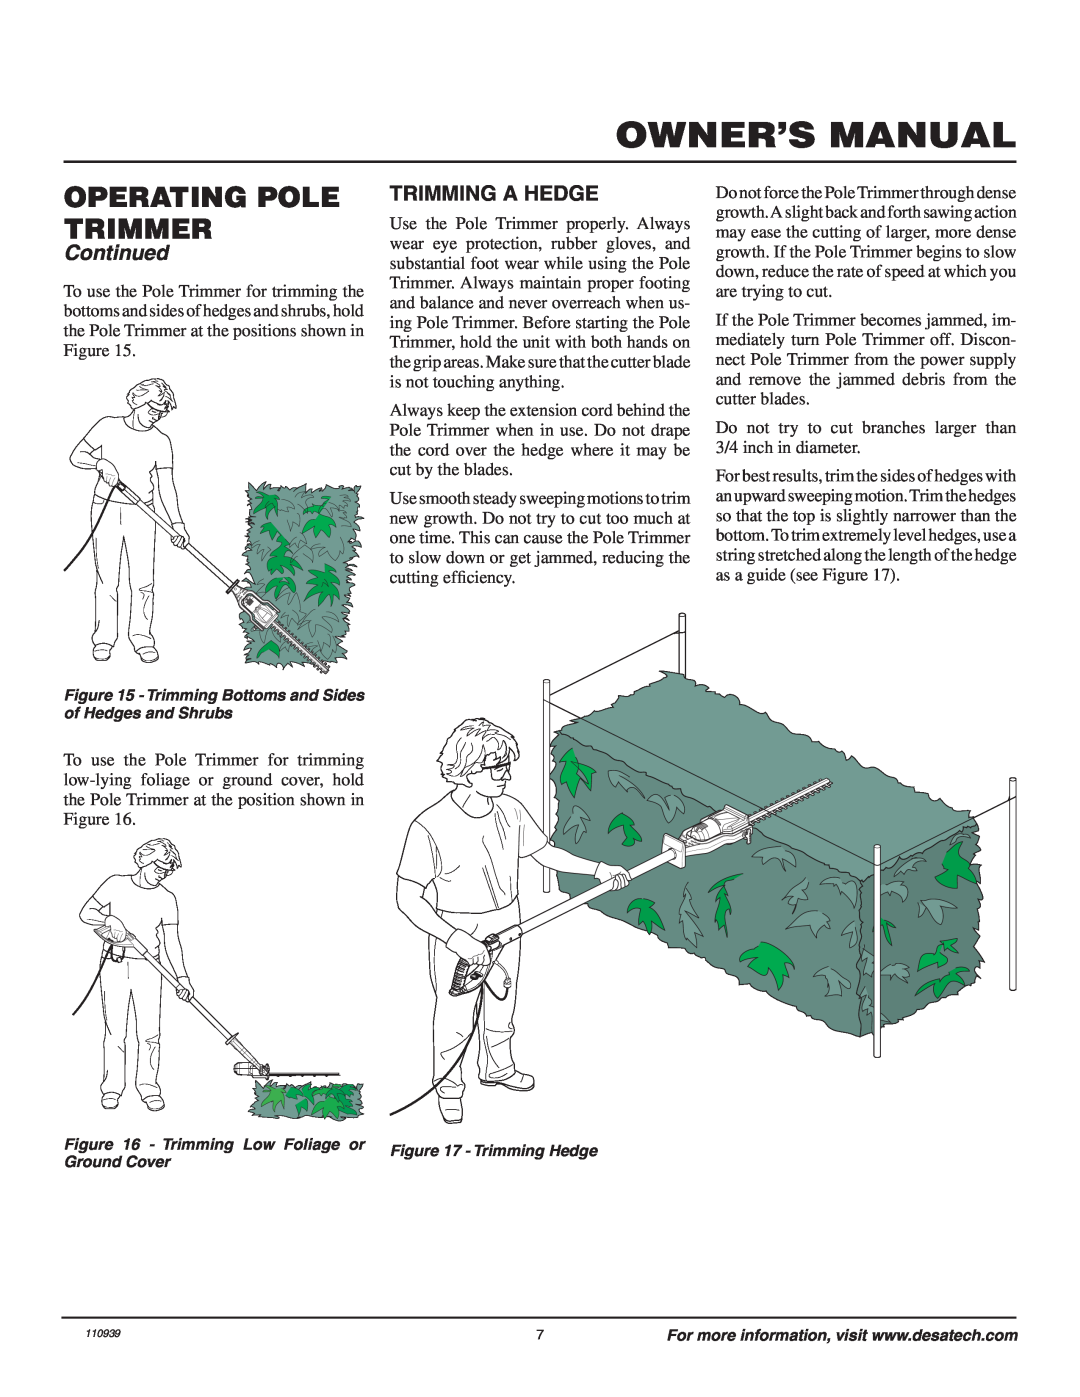 Remington Power Tools 117535-01A owner manual Trimming A Hedge, Owner’S Manual, Operating Pole Trimmer, Continued 